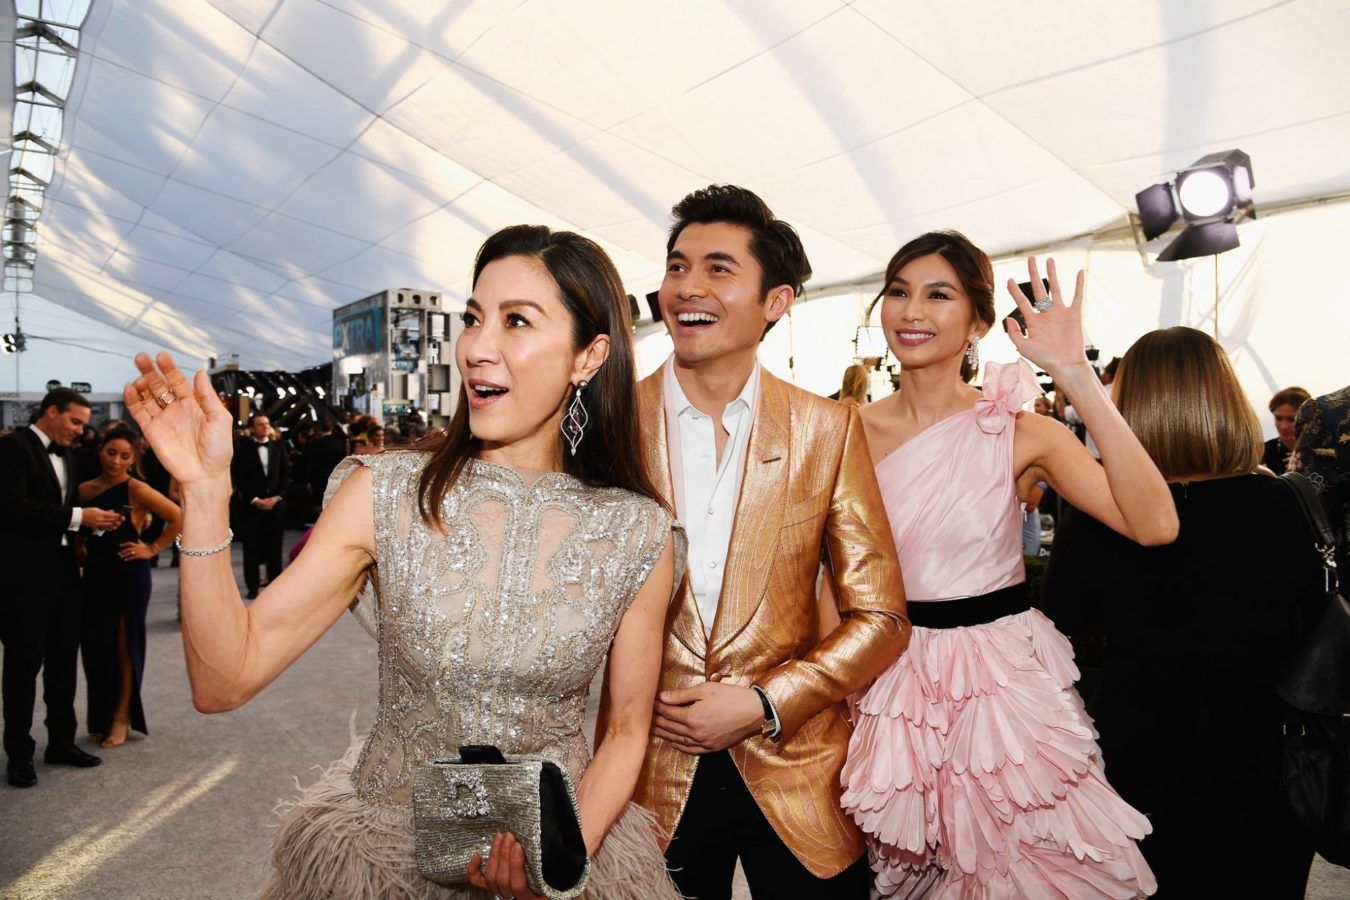 Here’s what we know about the new movie by ‘Crazy Rich Asians’ author Kevin Kwan